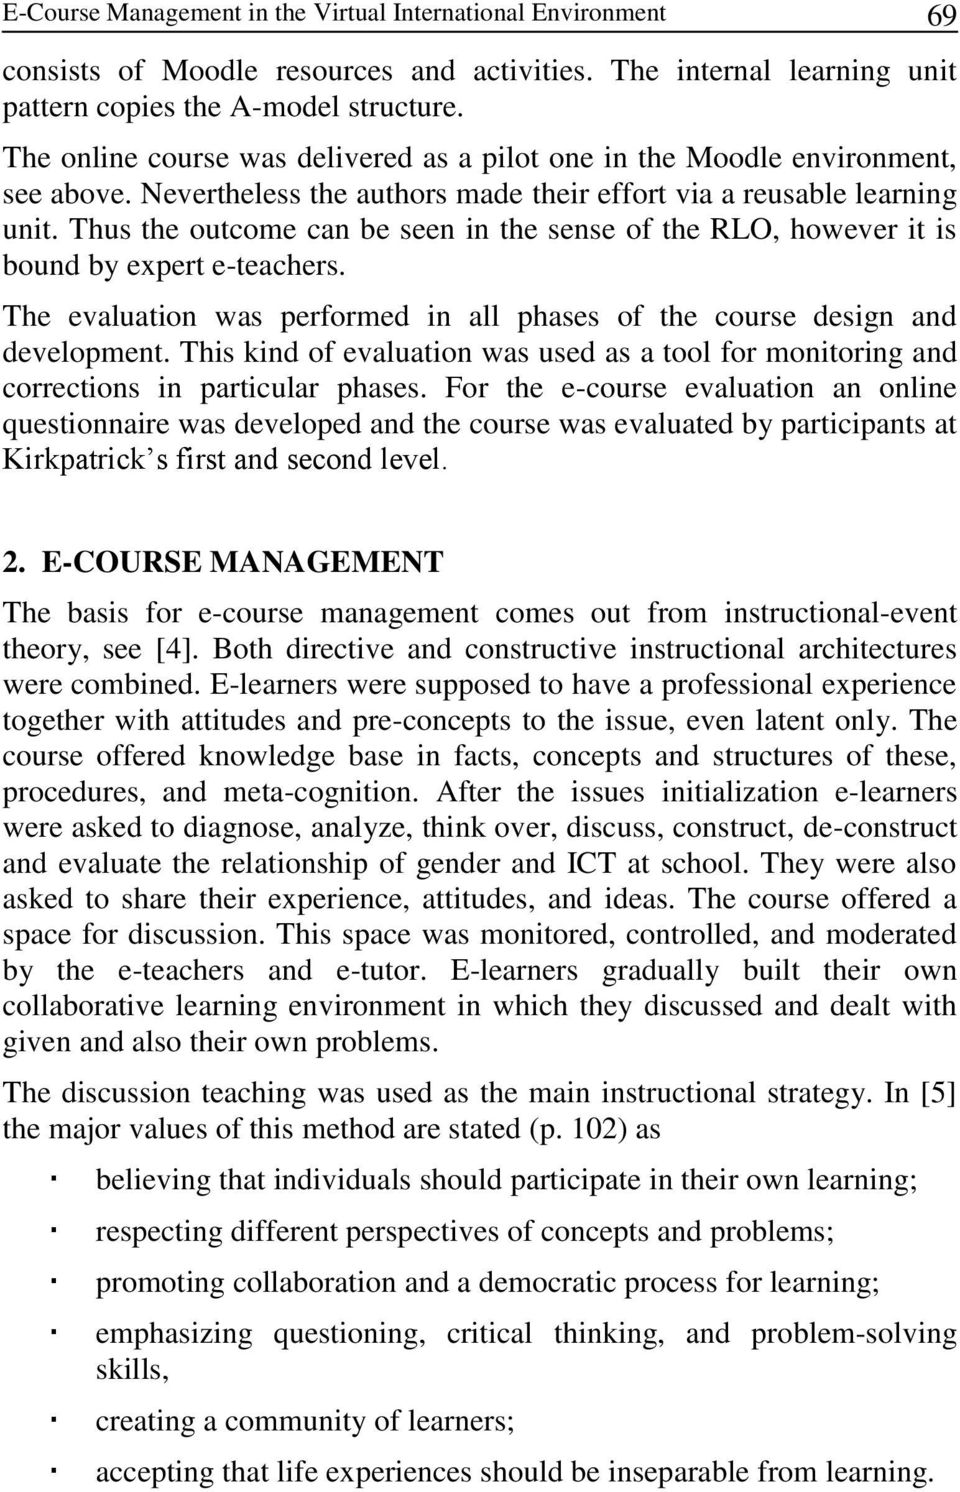 Thus the outcome can be seen in the sense of the RLO, however it is bound by expert e-teachers. The evaluation was performed in all phases of the course design and development.